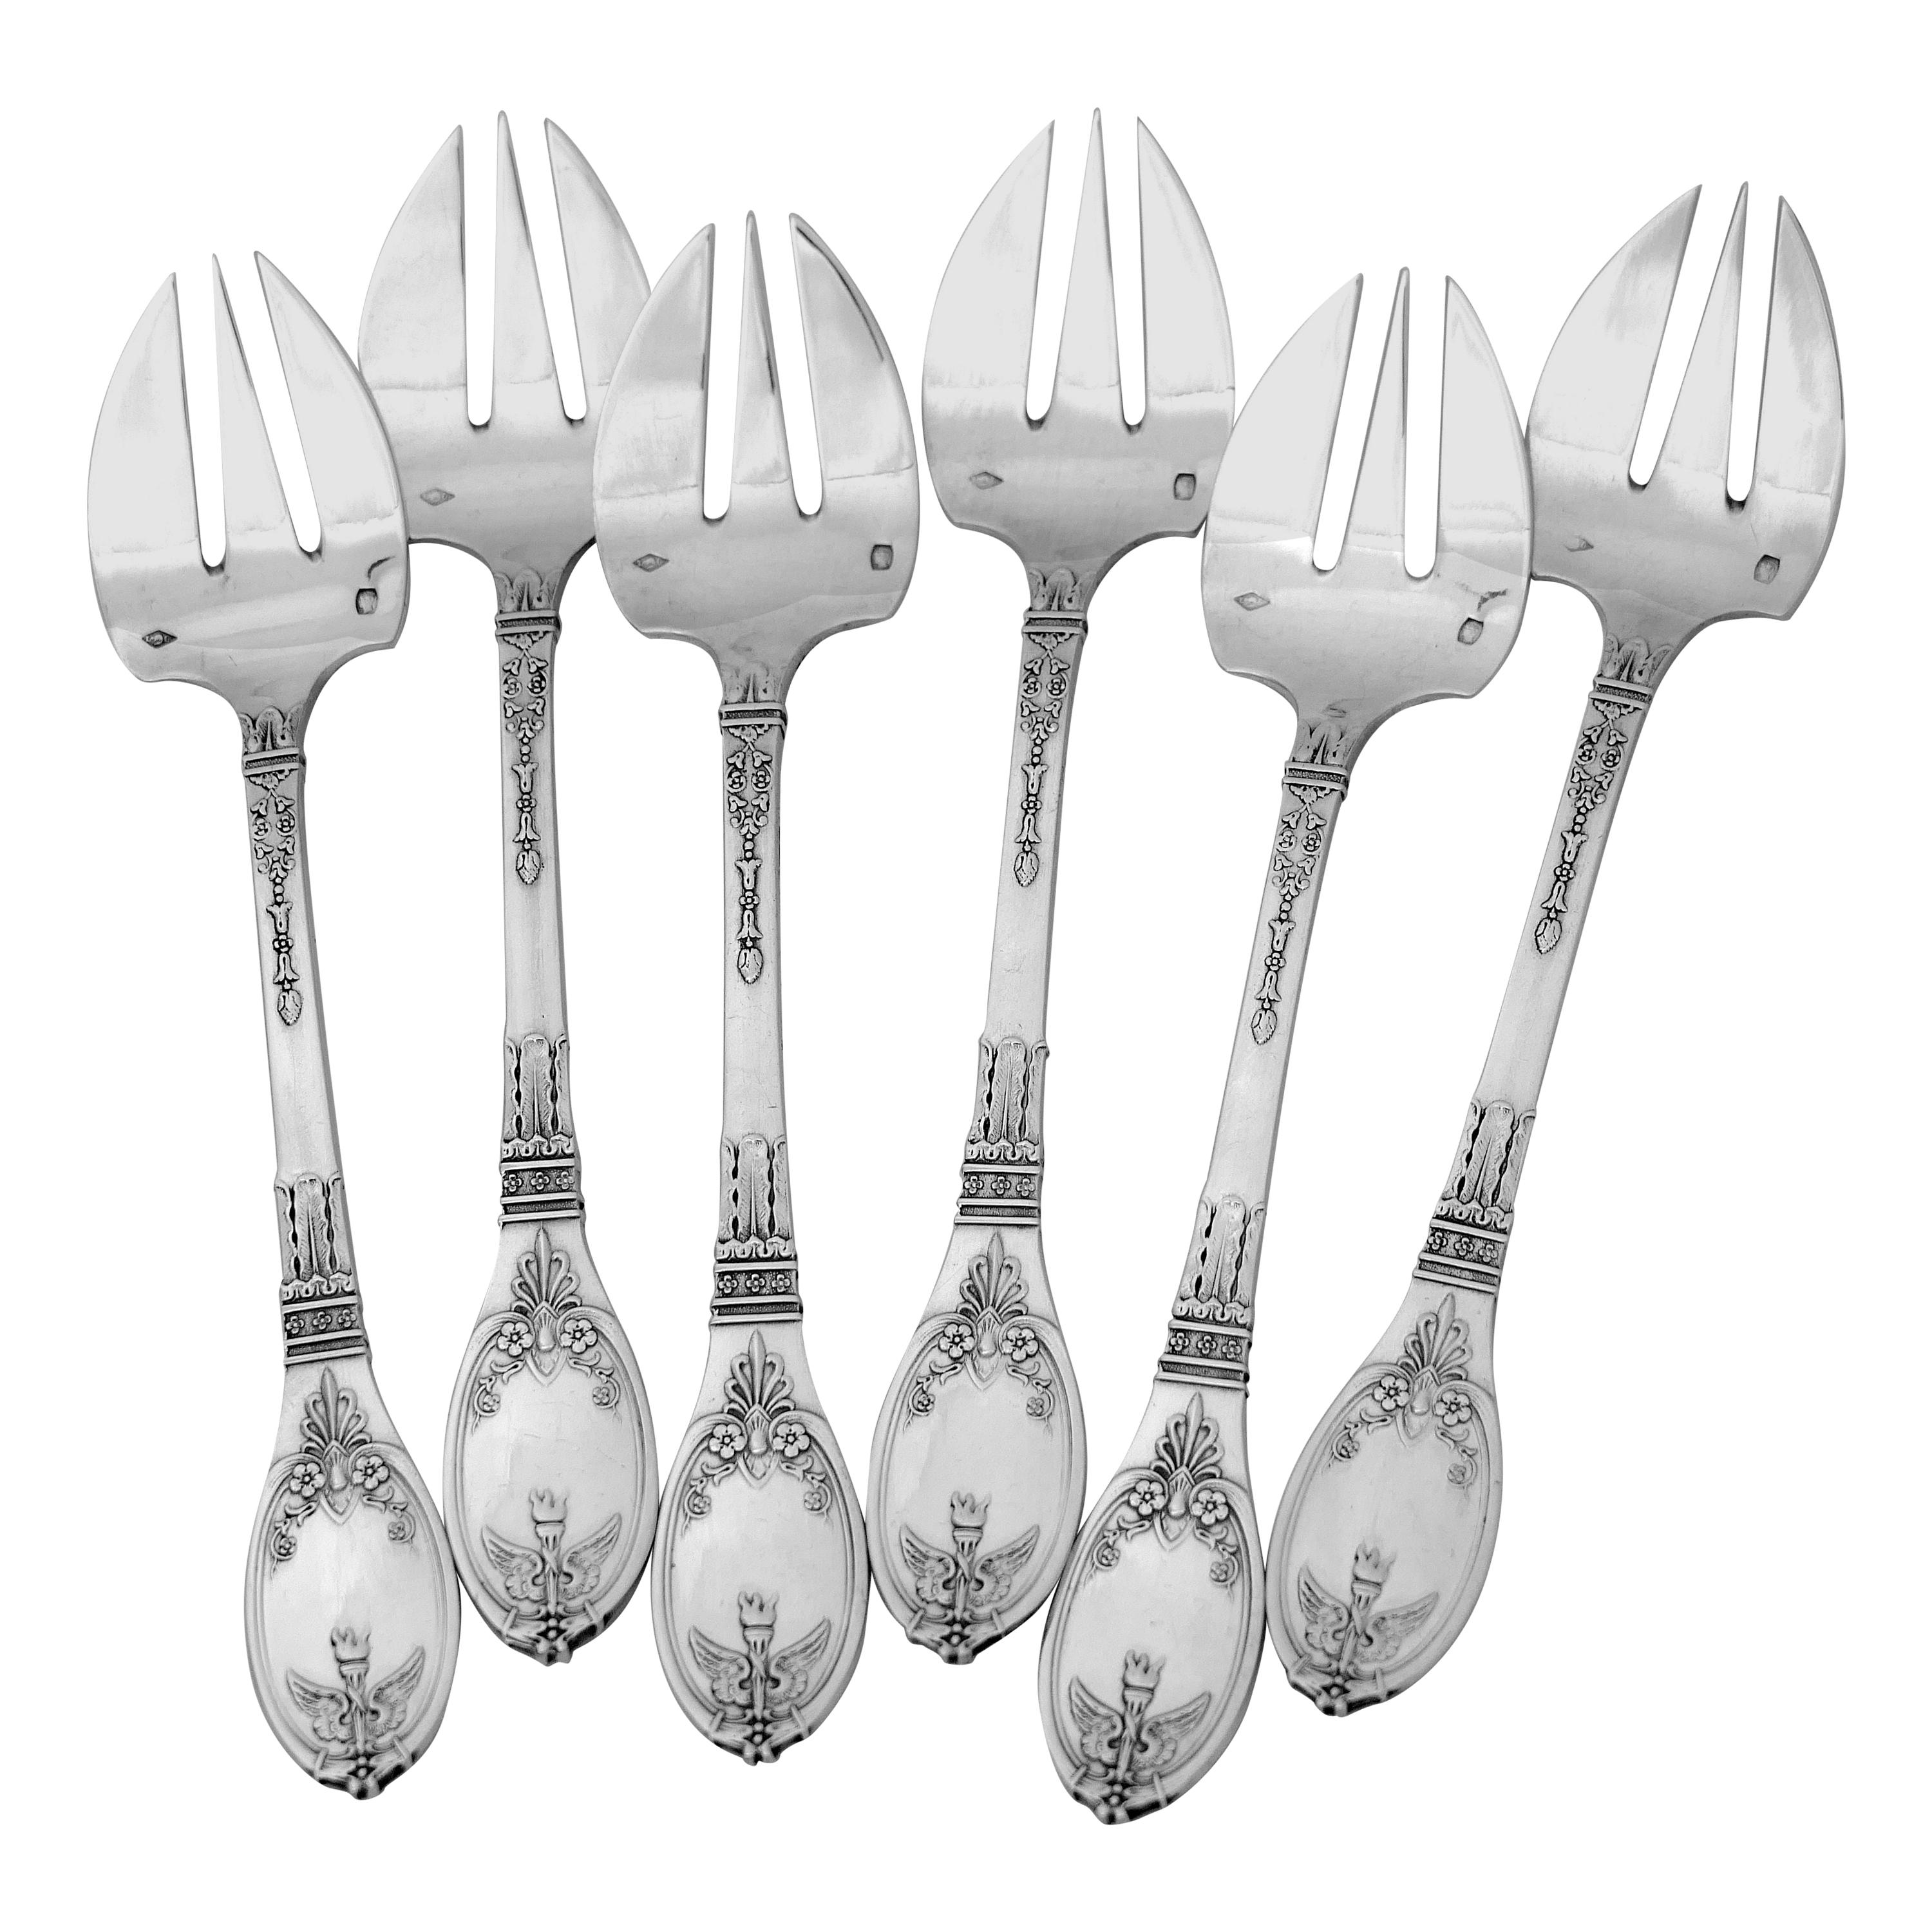 Lapparra Fabulous French Sterling Silver Oyster Forks Set 6 Pc, Empire Torch For Sale